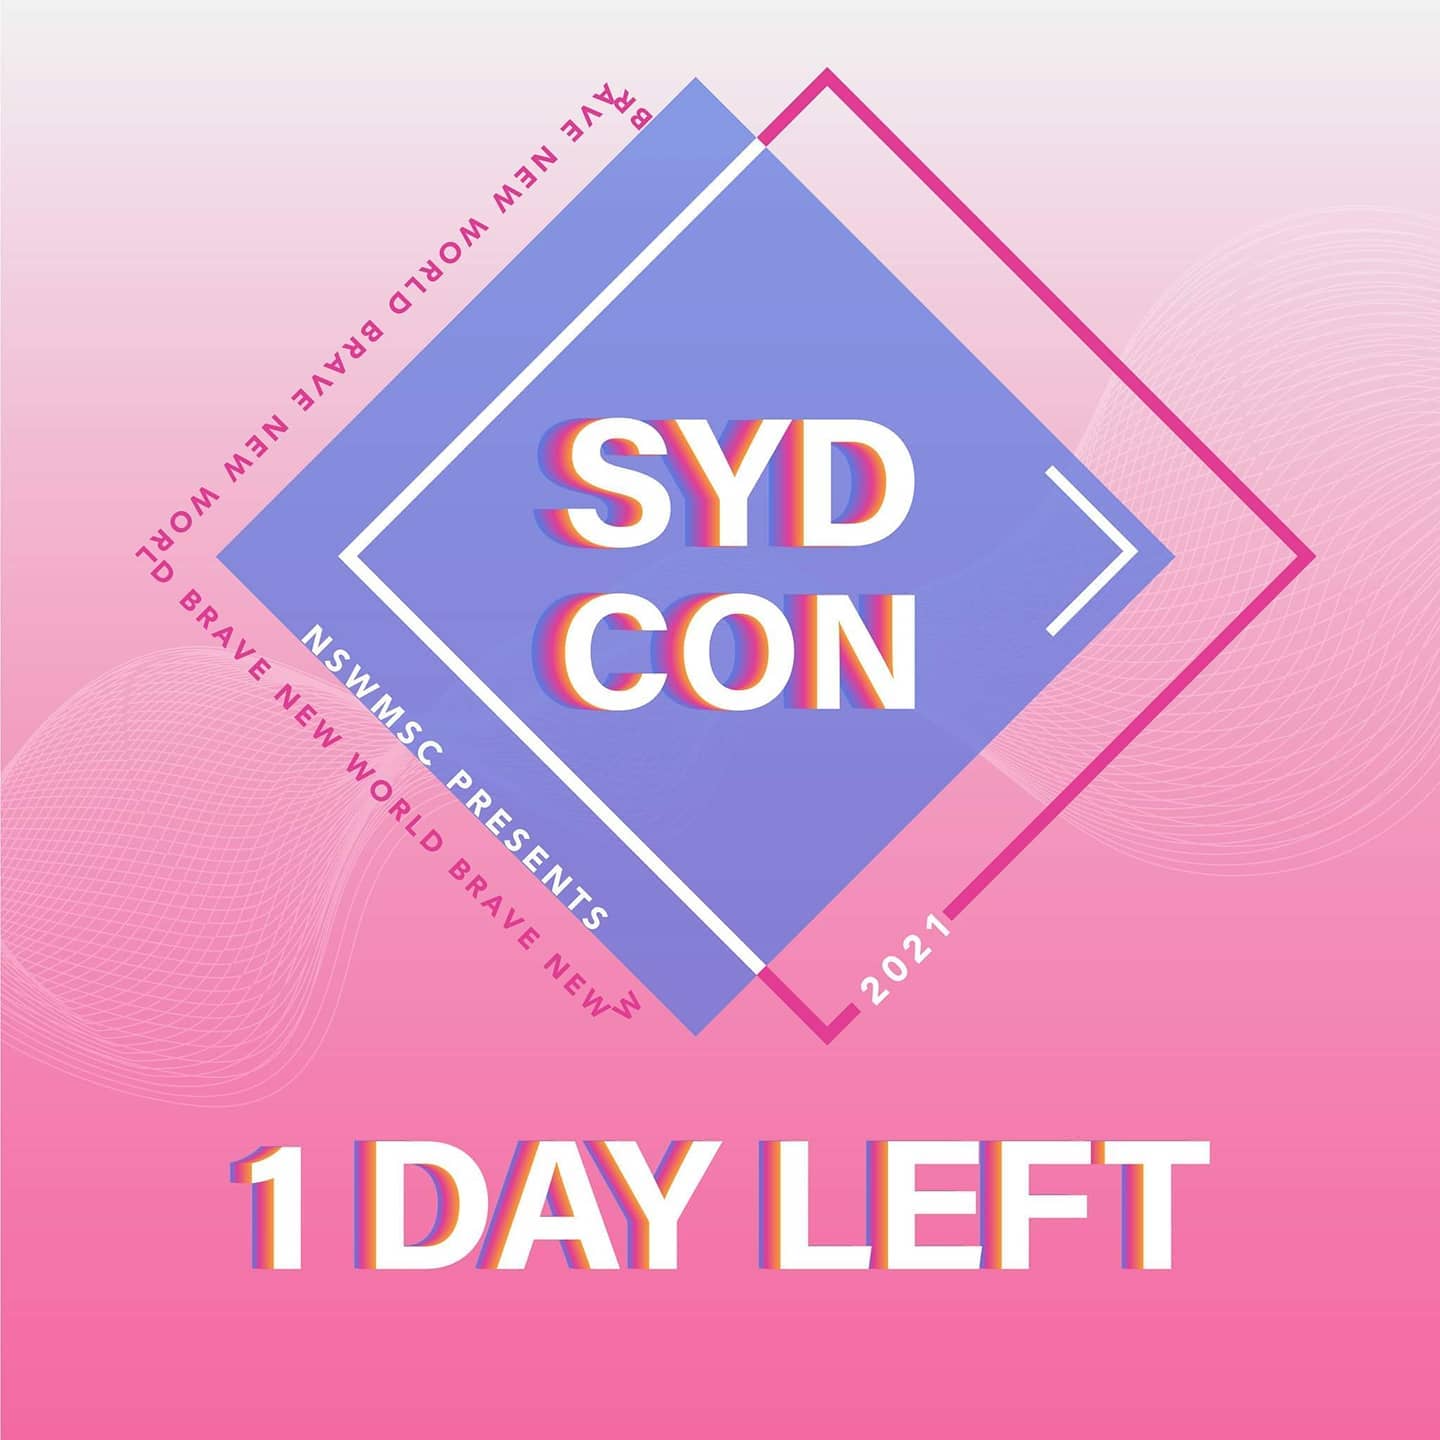 ✨ONE DAY LEFT TO APPLY FOR SUBCOMMITTEE✨

That's right, applications for subcommittee close at 11.59pm tomorrow night!

If you want to gain some experience in event management, creating lit social nights, enticing academics, exciting emergency medical challenges or gorgeous graphics get onto it now🎉

APPLY: https://www.nswmsc.org.au/subcommittee-applications/